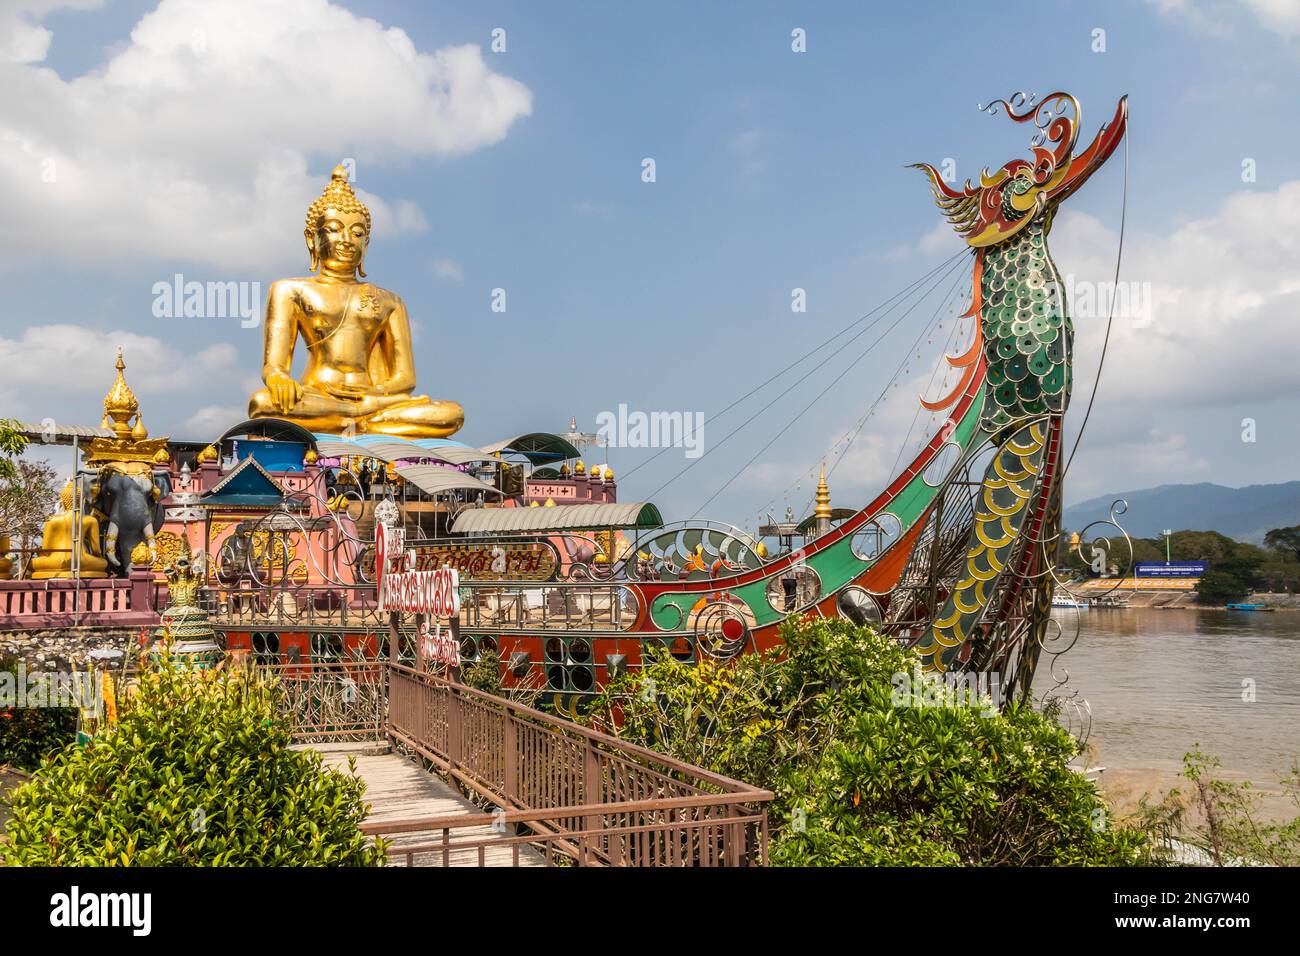 Buddah statue on boat on the Mekhong River at the Golden Triangle where from Thailand you can see Laos and Myanmar. Stock Photo